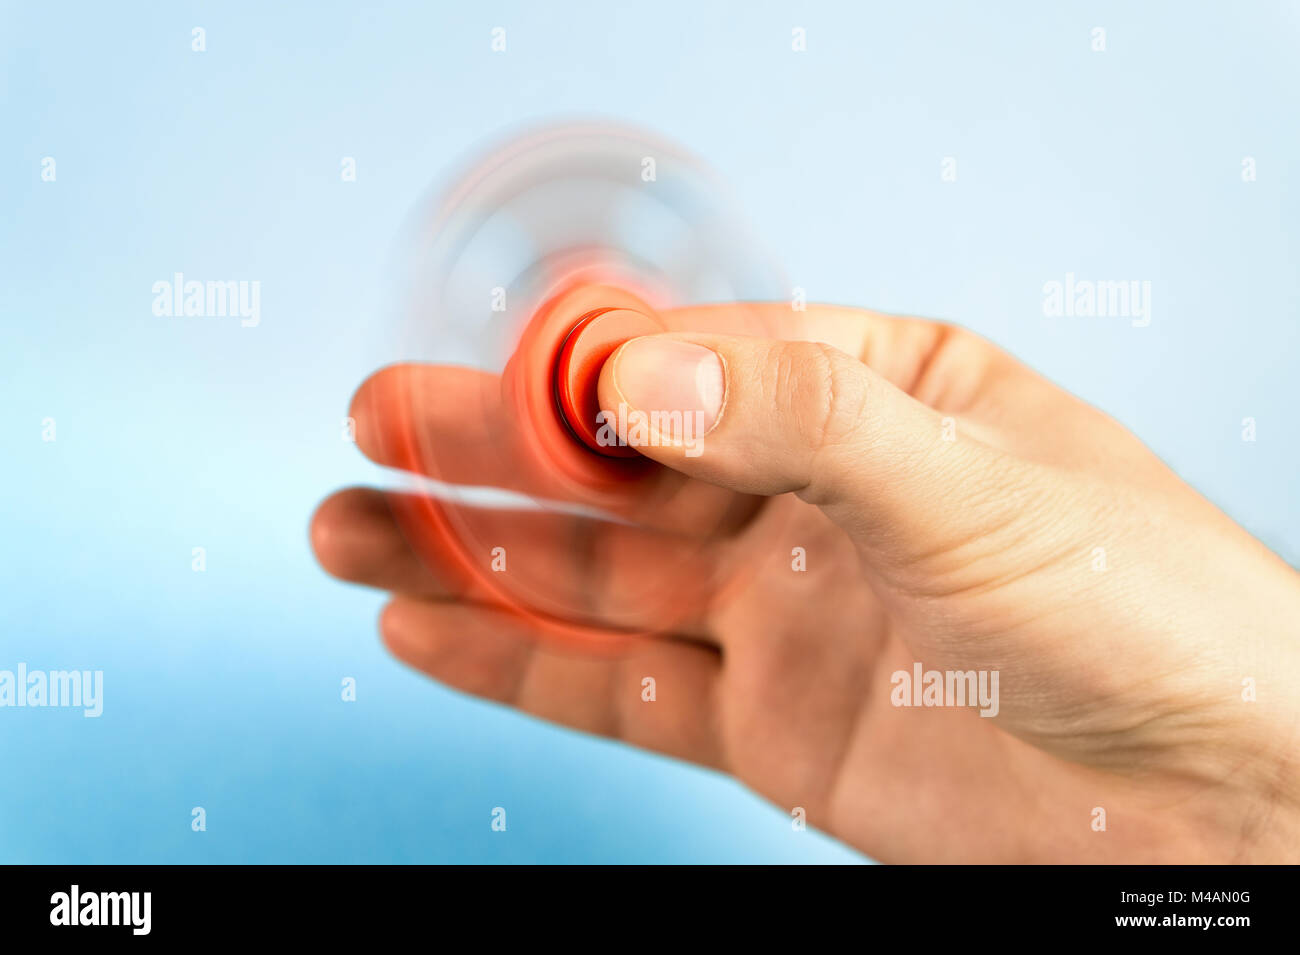 Fidget spinner spinning in hand with blue background Stock Photo